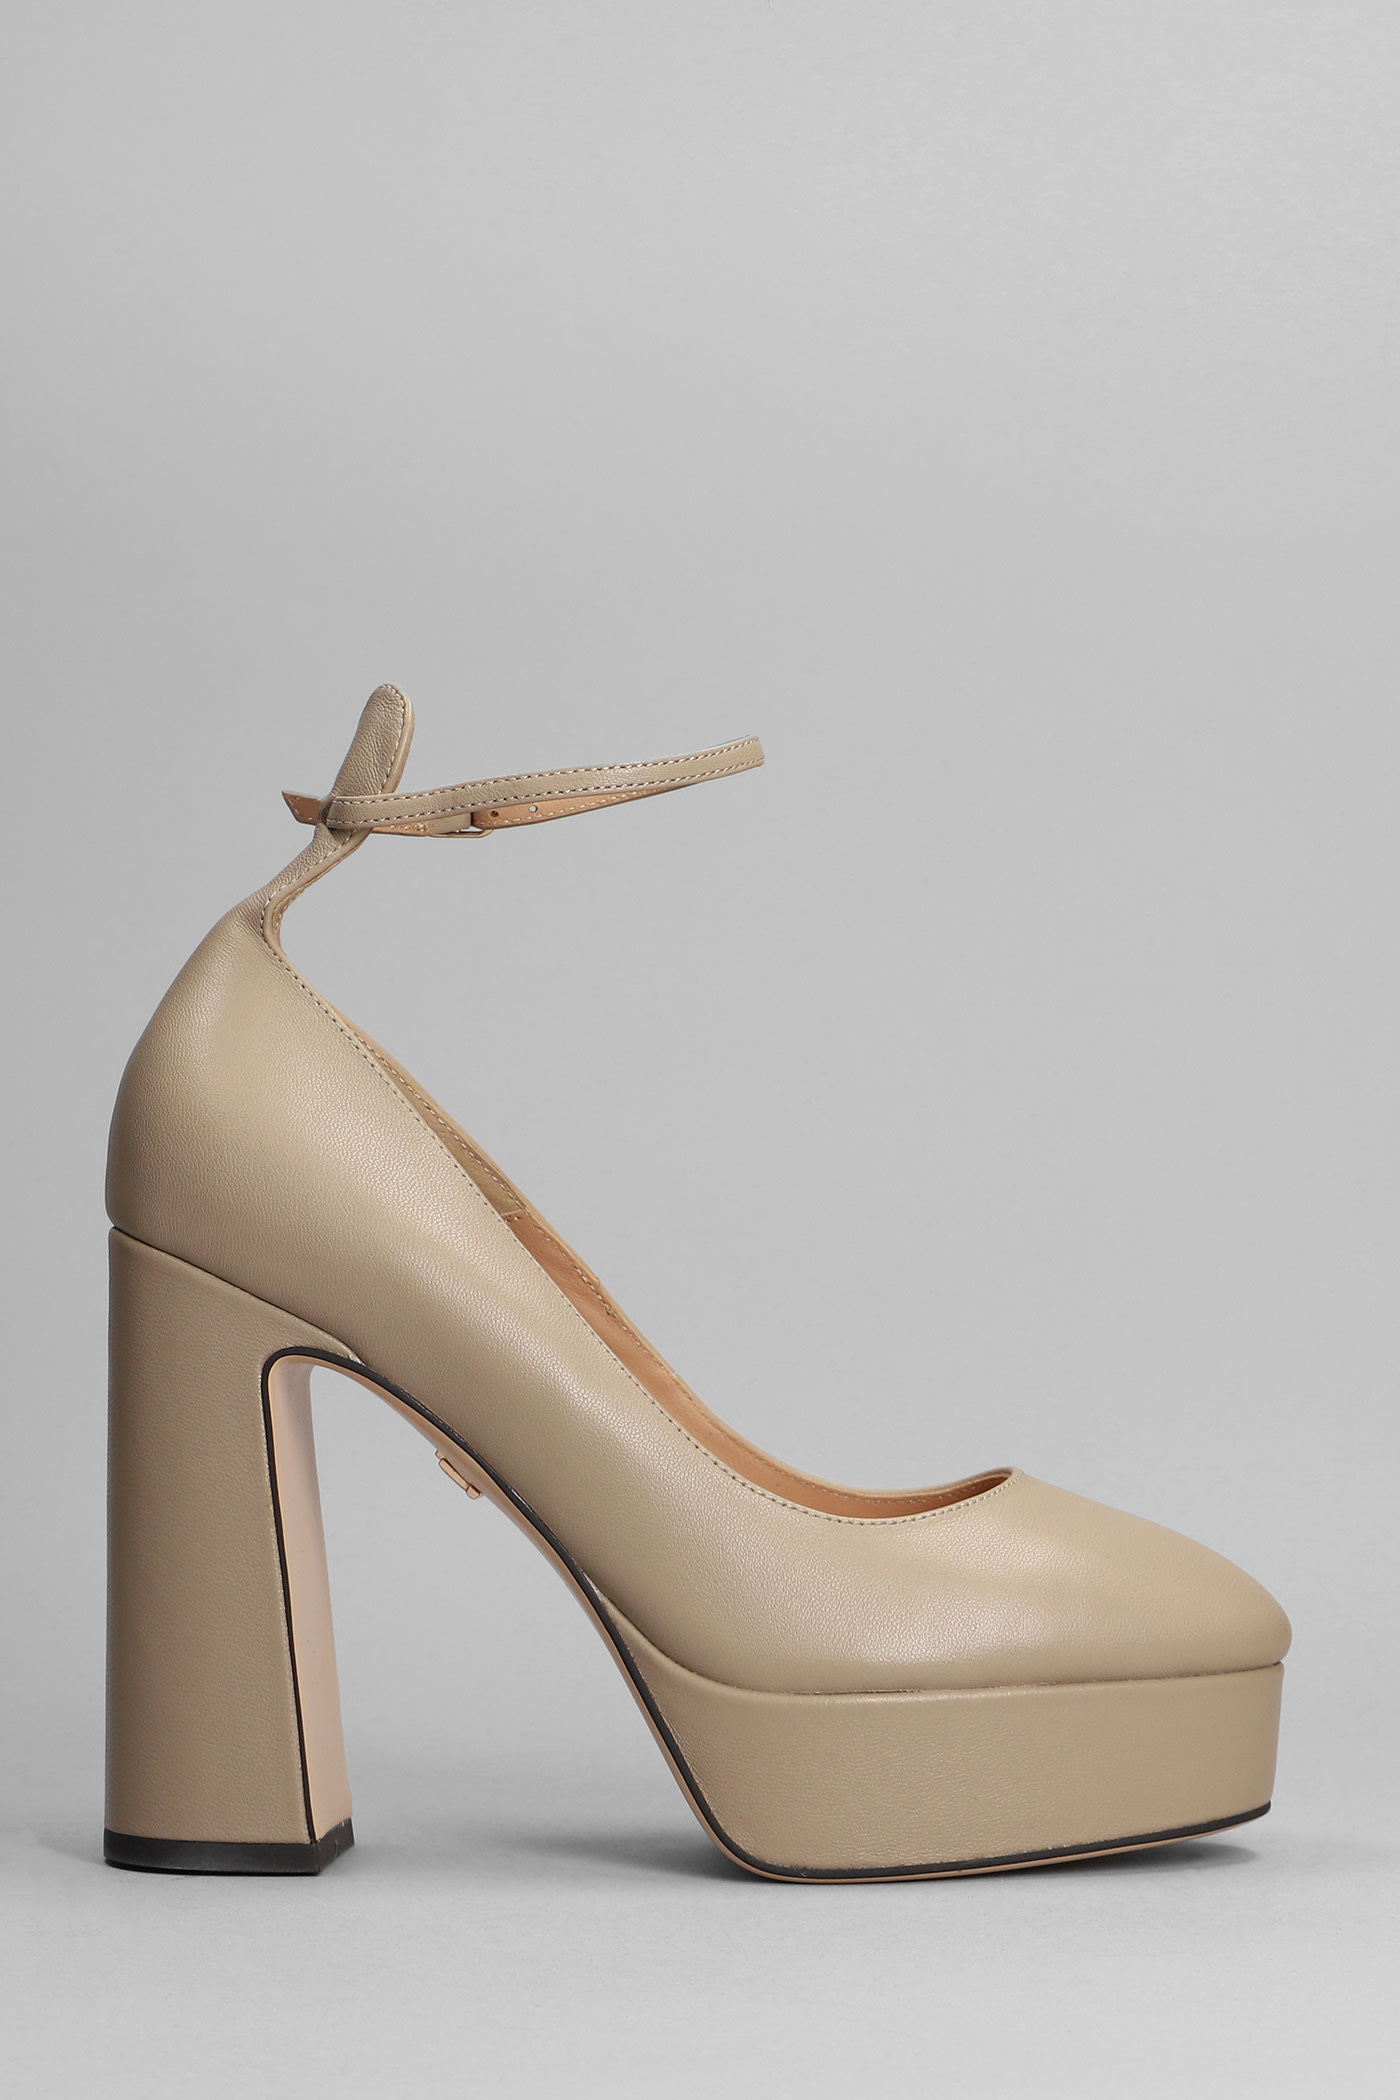 Lola Cruz Pumps In Taupe Leather